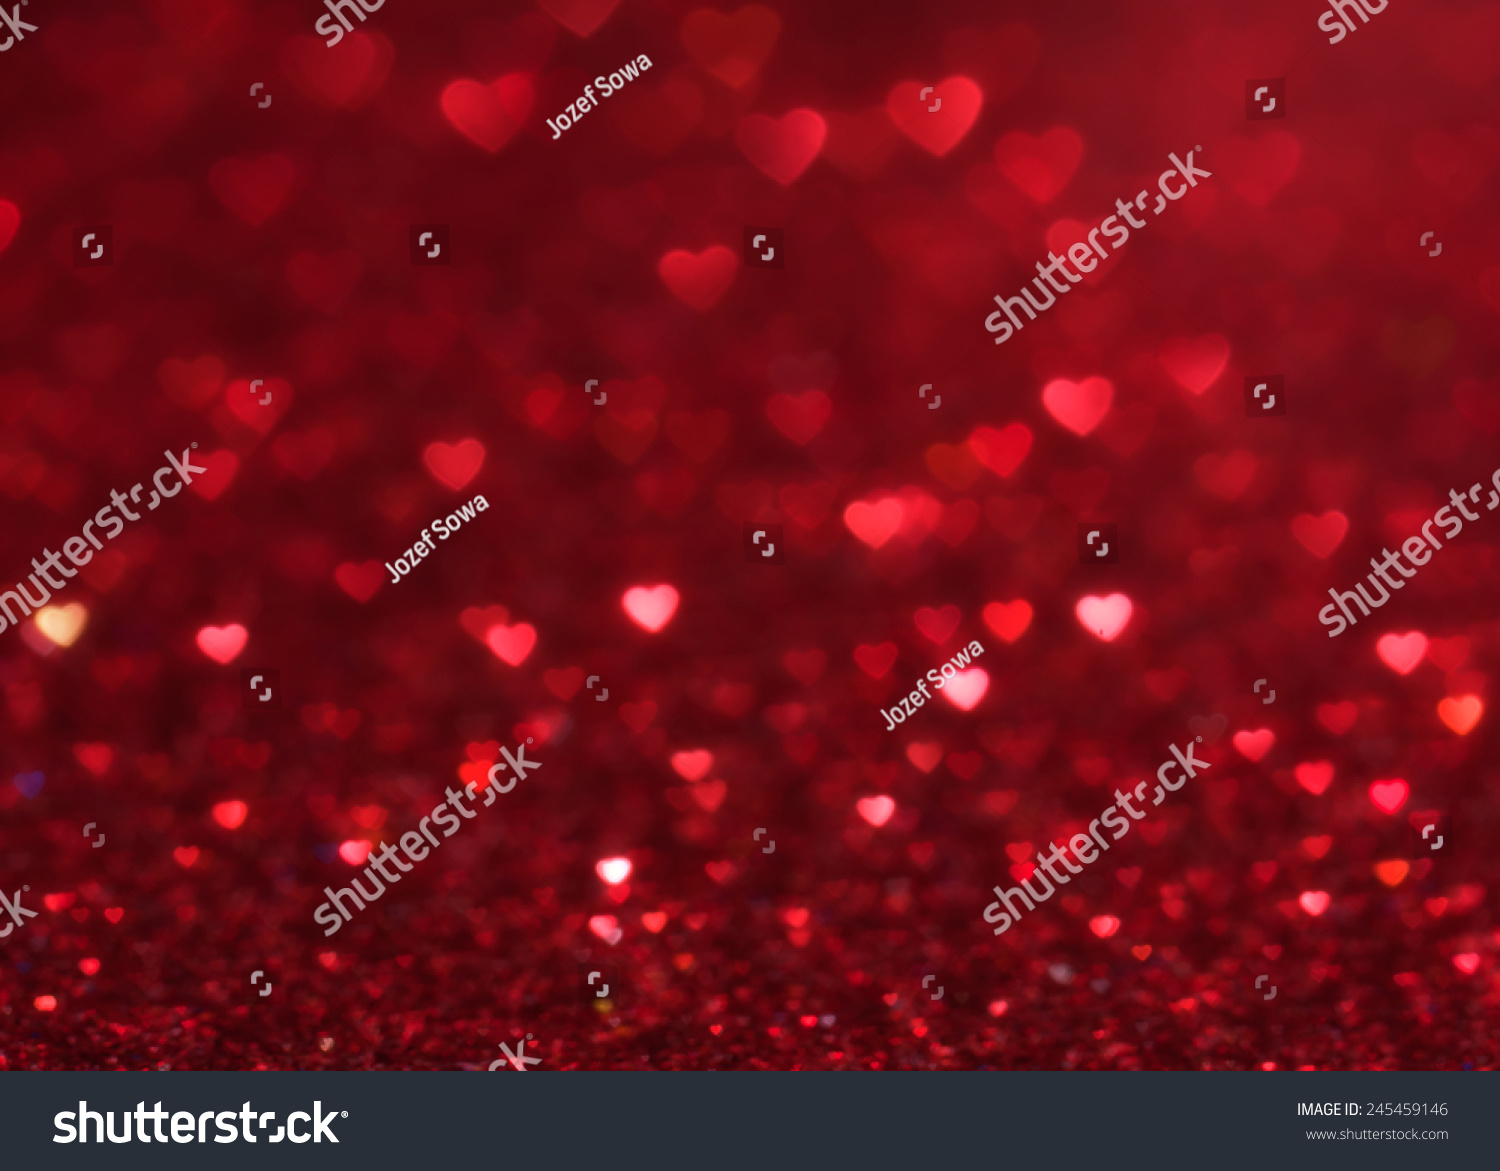 hearts as background. valentines day concept #245459146